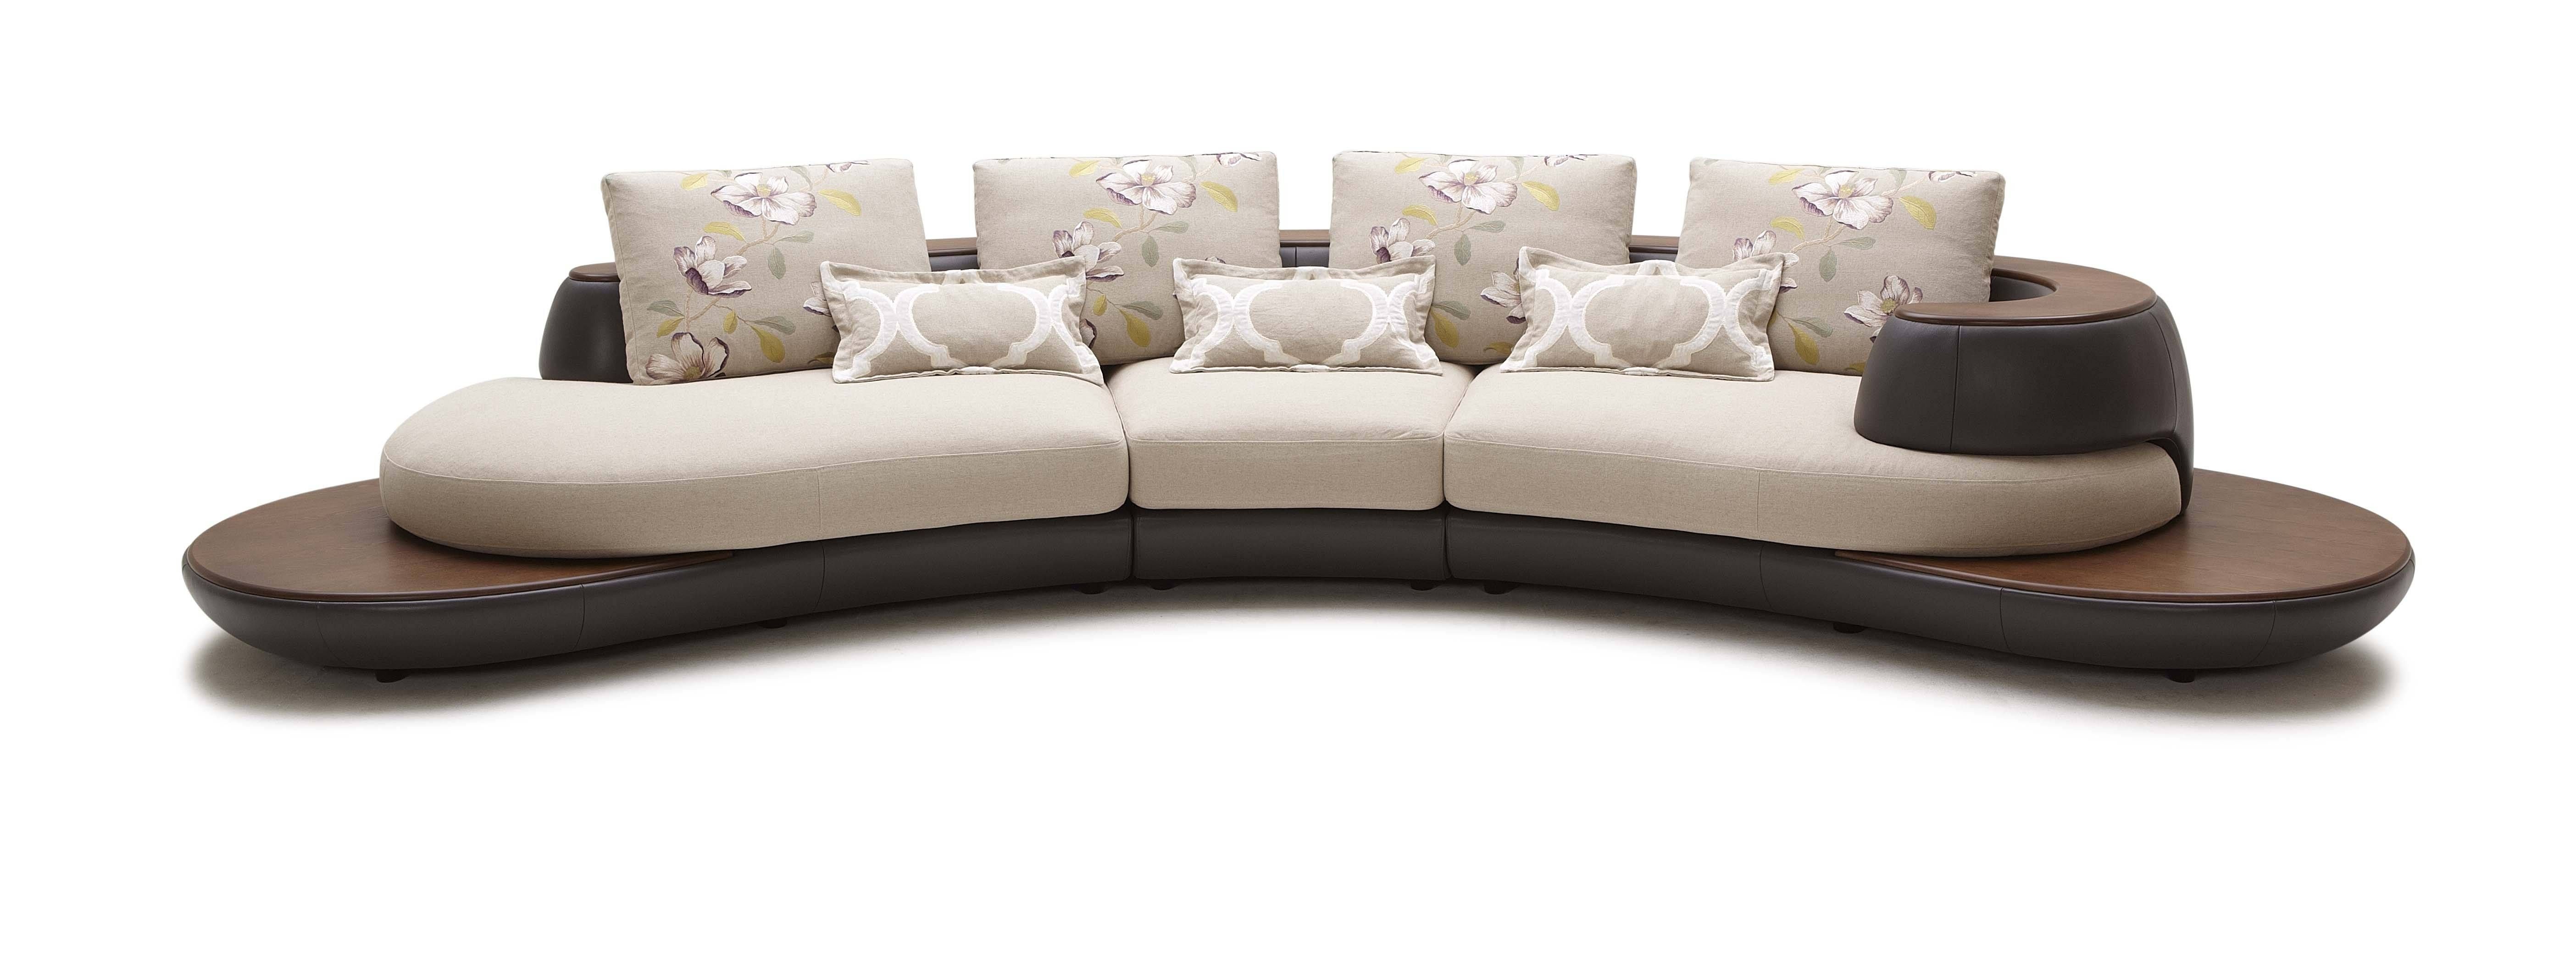 Elegant Fabric Sectional Sofas With Chaise 74 About Remodel Camo Intended For Elegant Fabric Sofas (View 25 of 30)